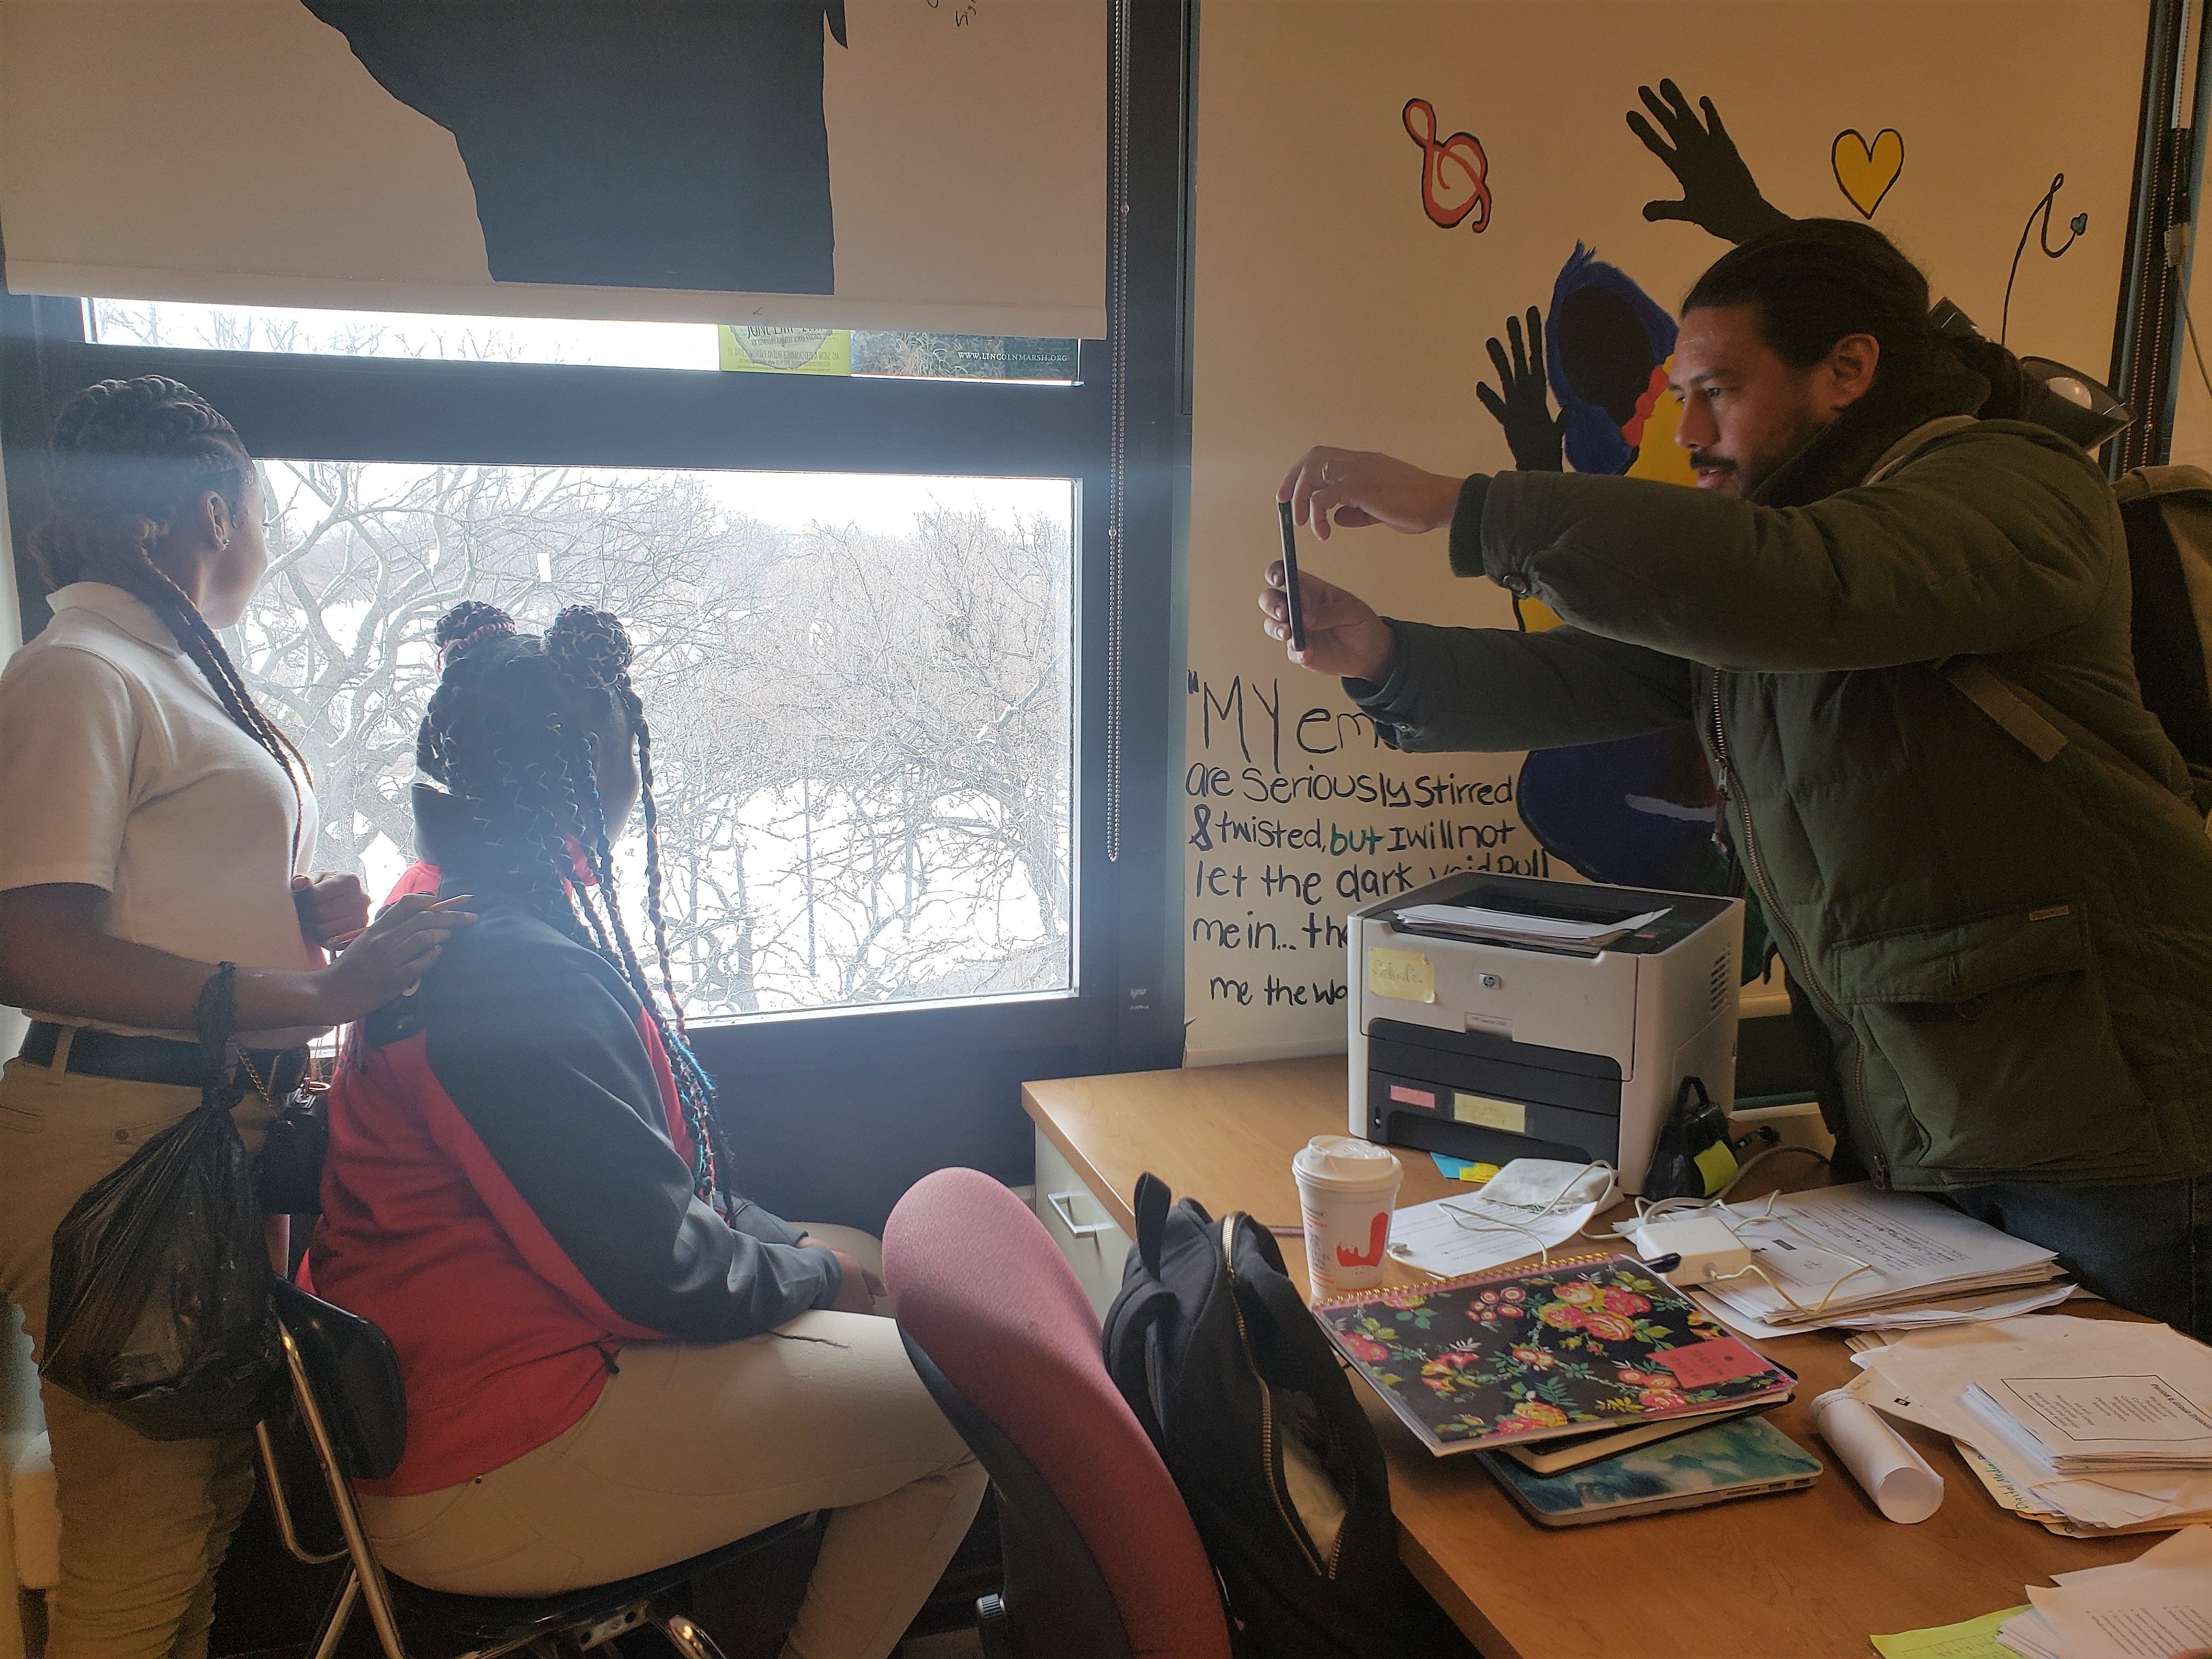 Brian Frank holds an impromptu photo shoot with students at North Lawndale College Prep on Chicago's west side. Image by Keta Glenn. United States, 2018.